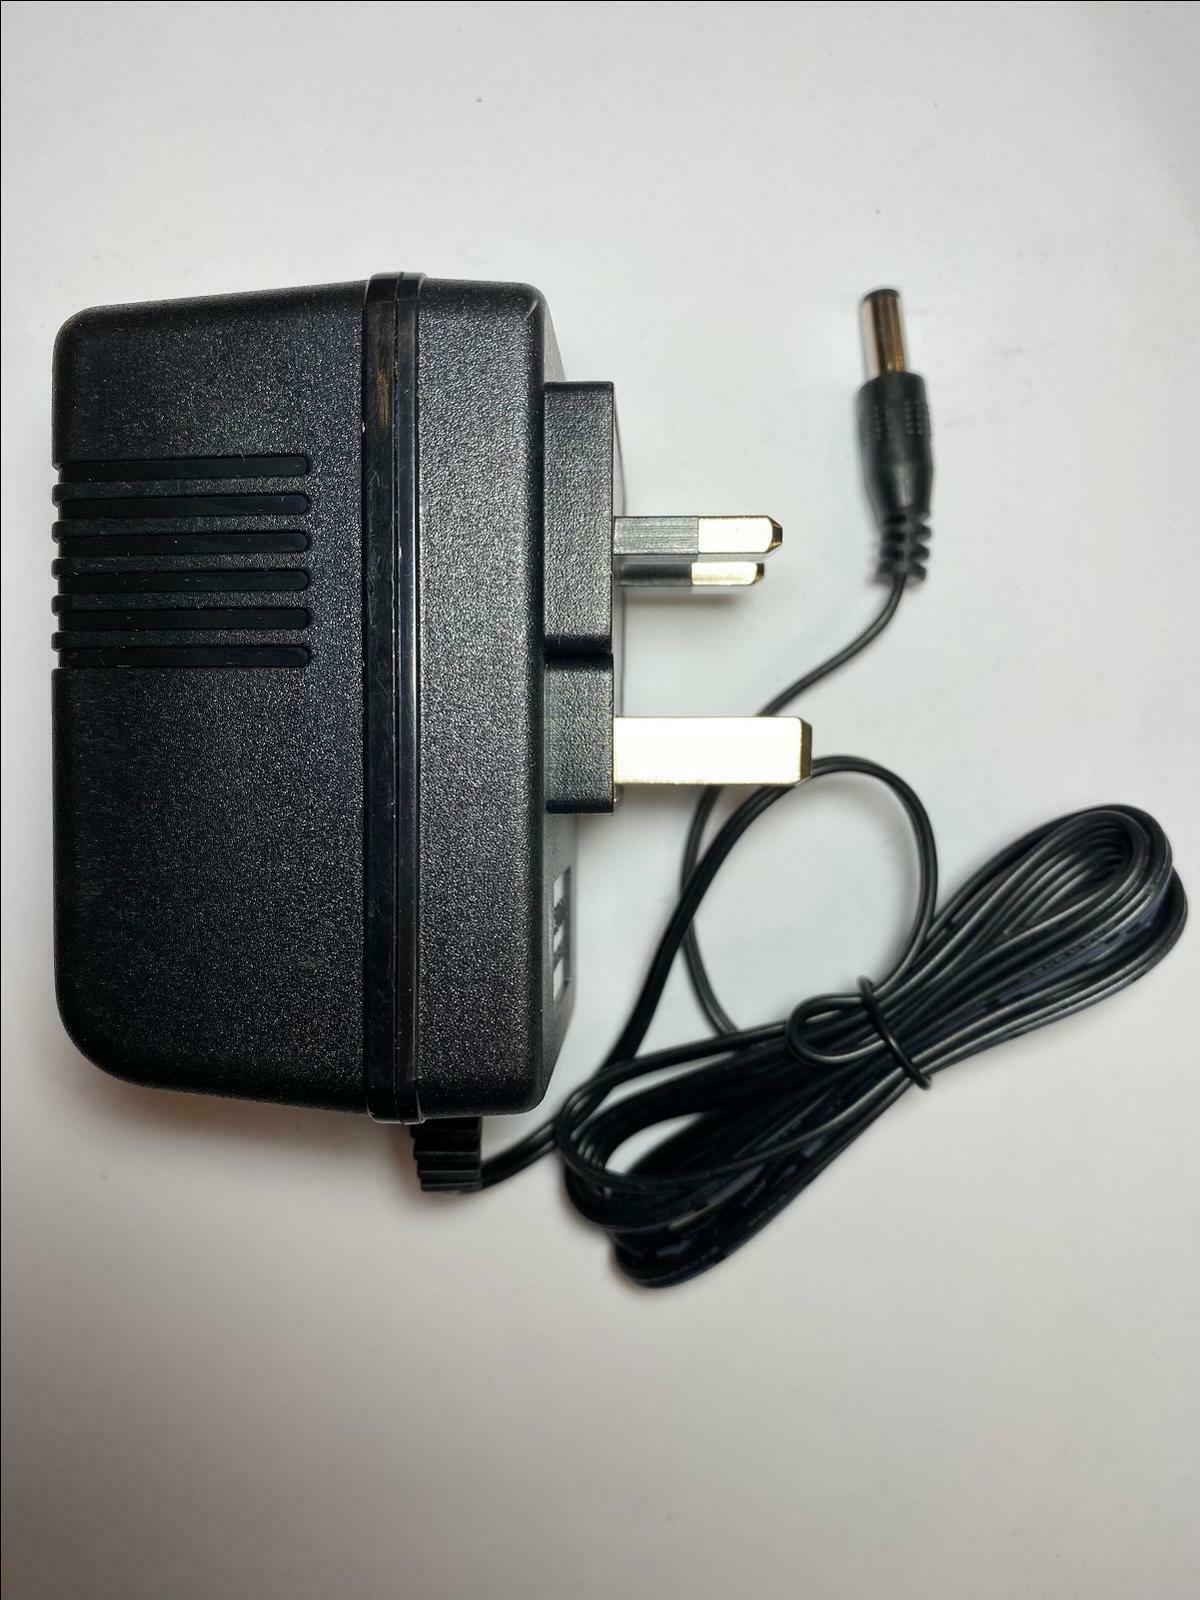 95720-00 9572000 AC Adapter For Spectra Grade Laser Charger LL100 LL400 GL412N-2 GL412N-14 LL500 GL412 GL422 Q102734 Co - Click Image to Close